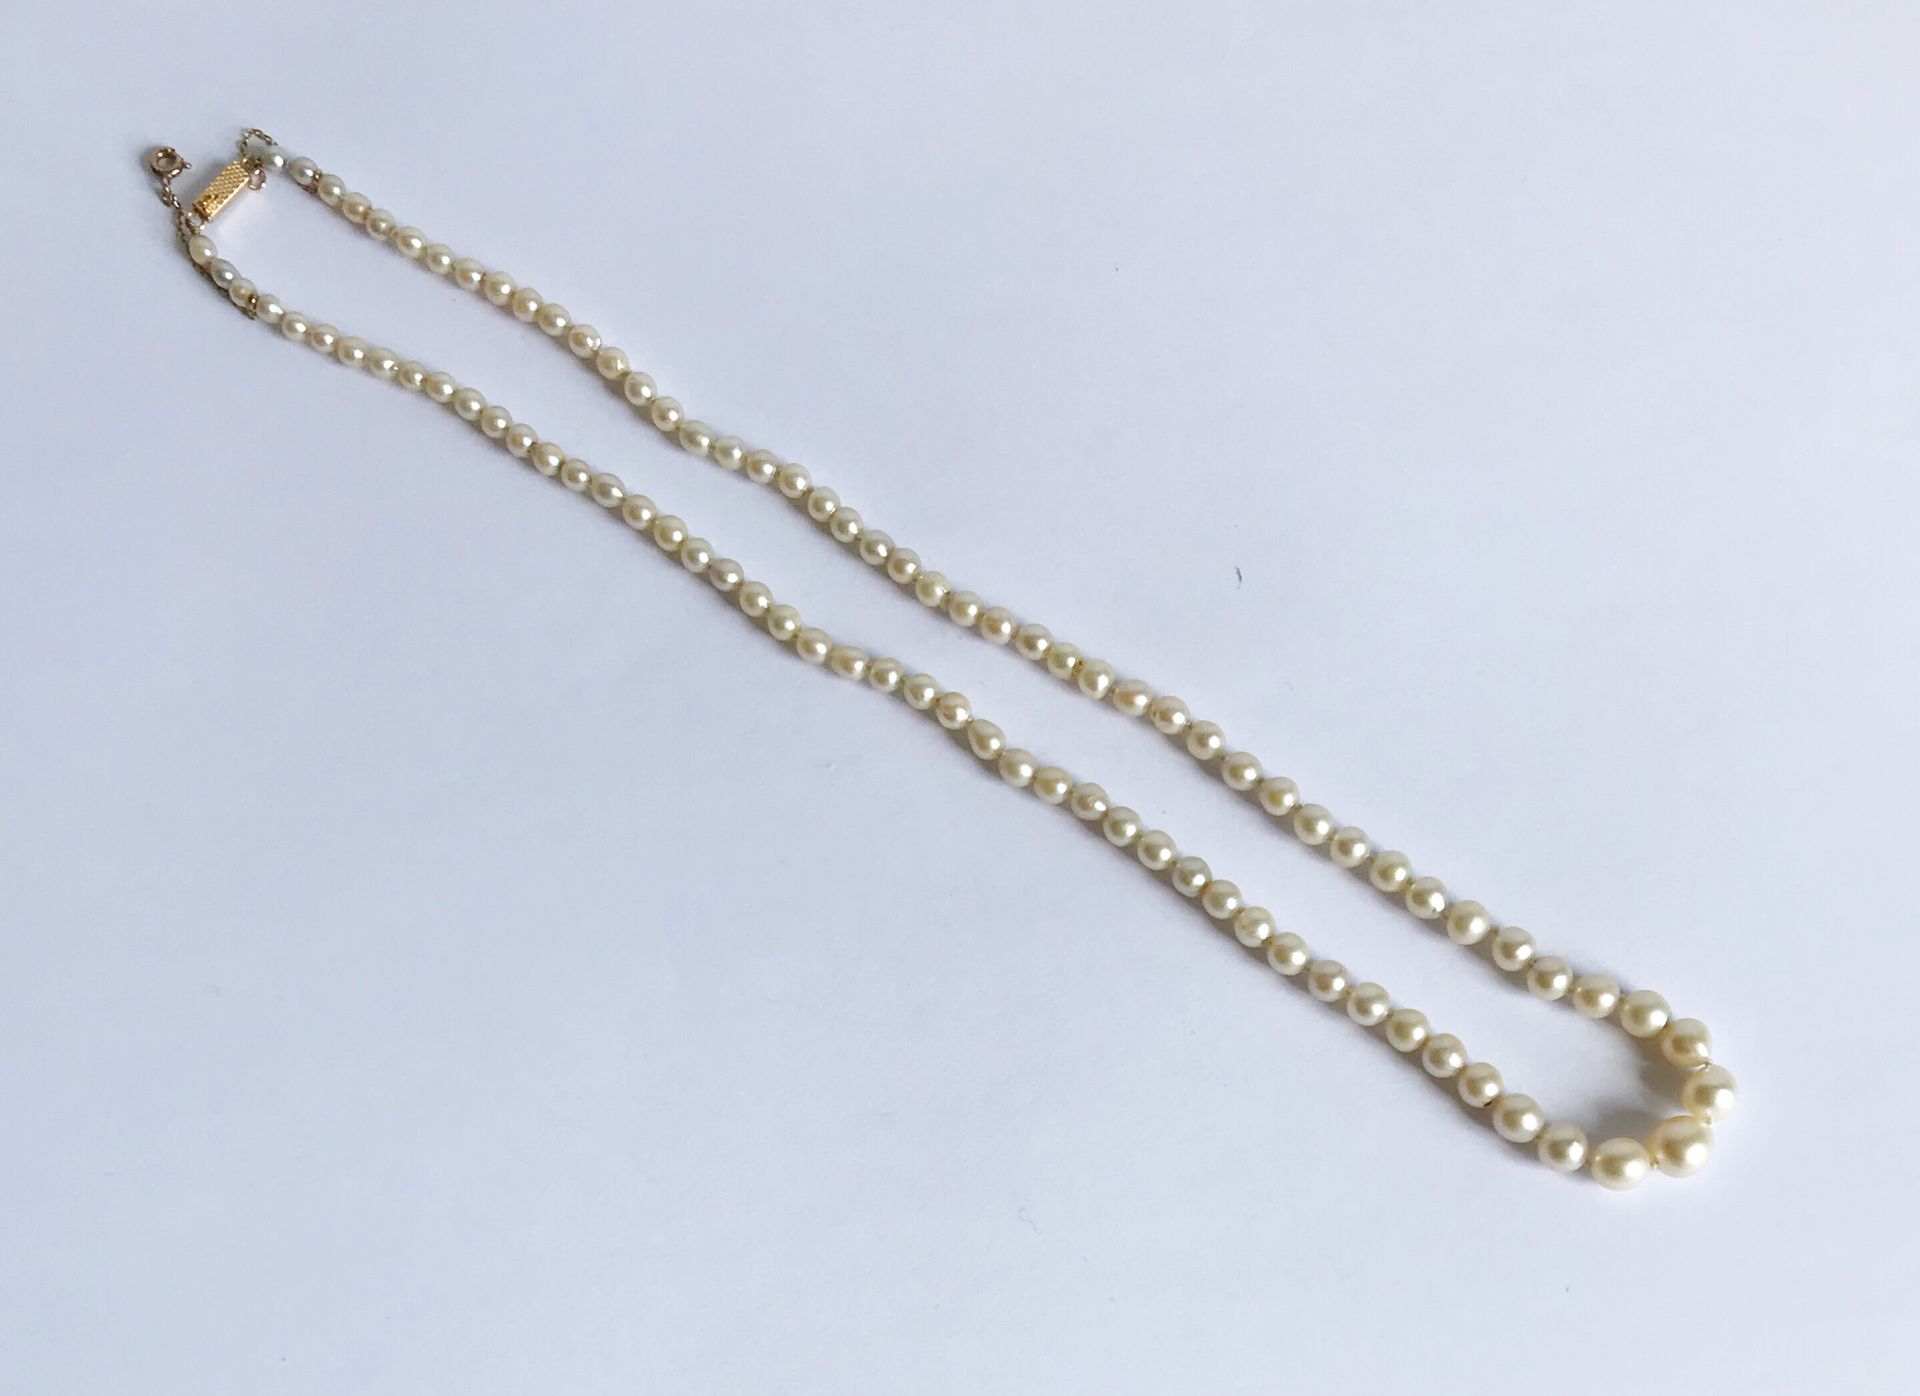 Null Necklace of cultured pearls in fall. Gold clasp with safety chain